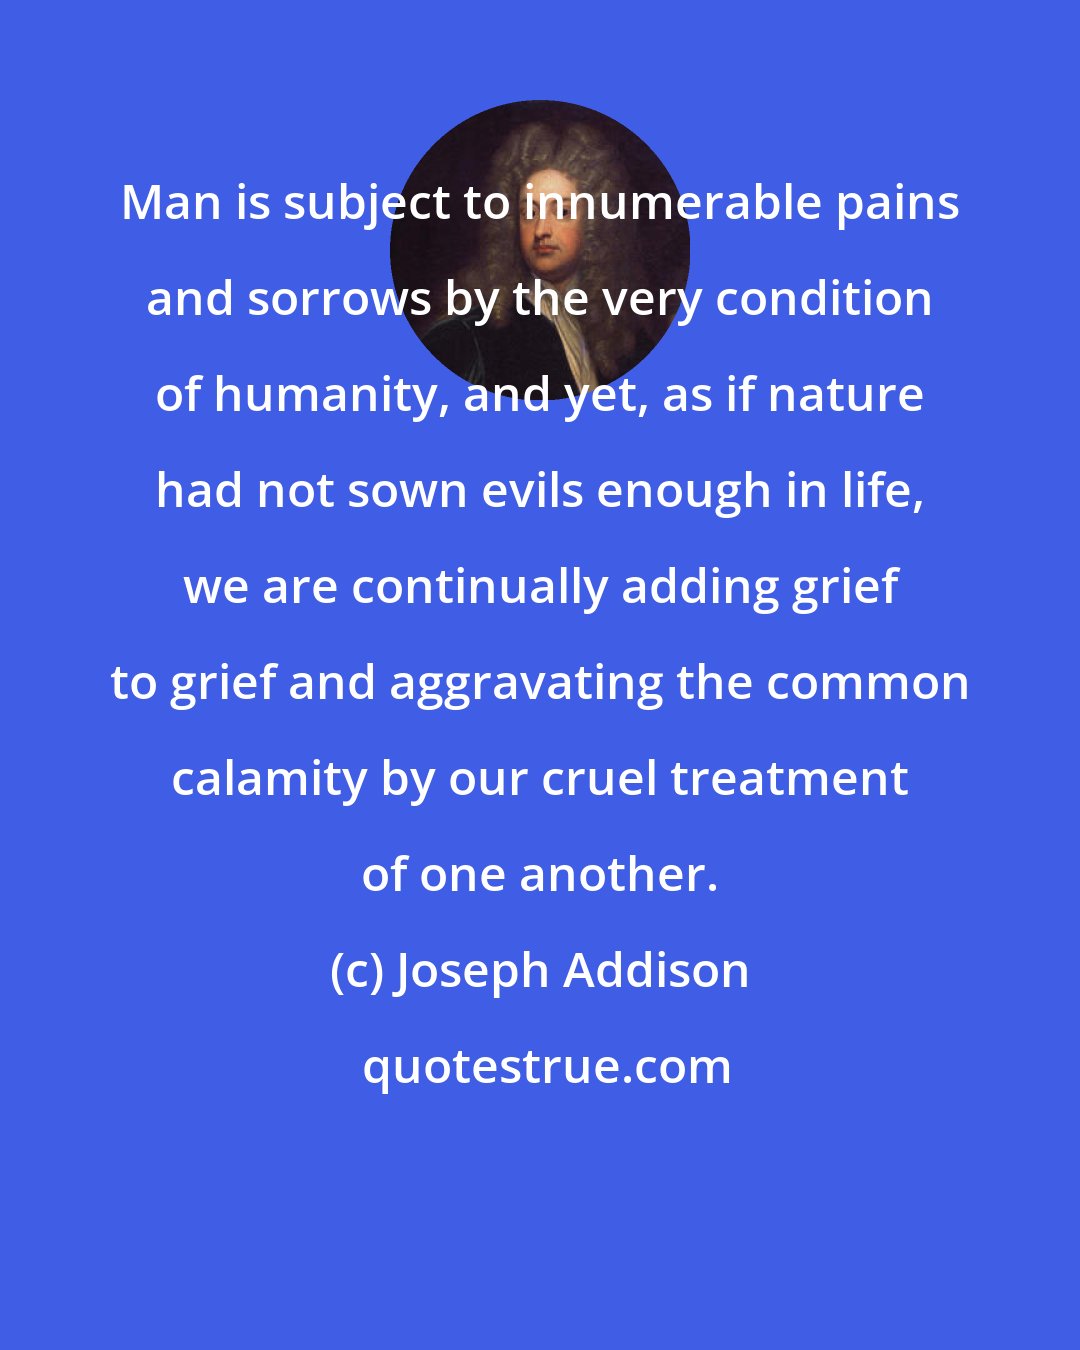 Joseph Addison: Man is subject to innumerable pains and sorrows by the very condition of humanity, and yet, as if nature had not sown evils enough in life, we are continually adding grief to grief and aggravating the common calamity by our cruel treatment of one another.